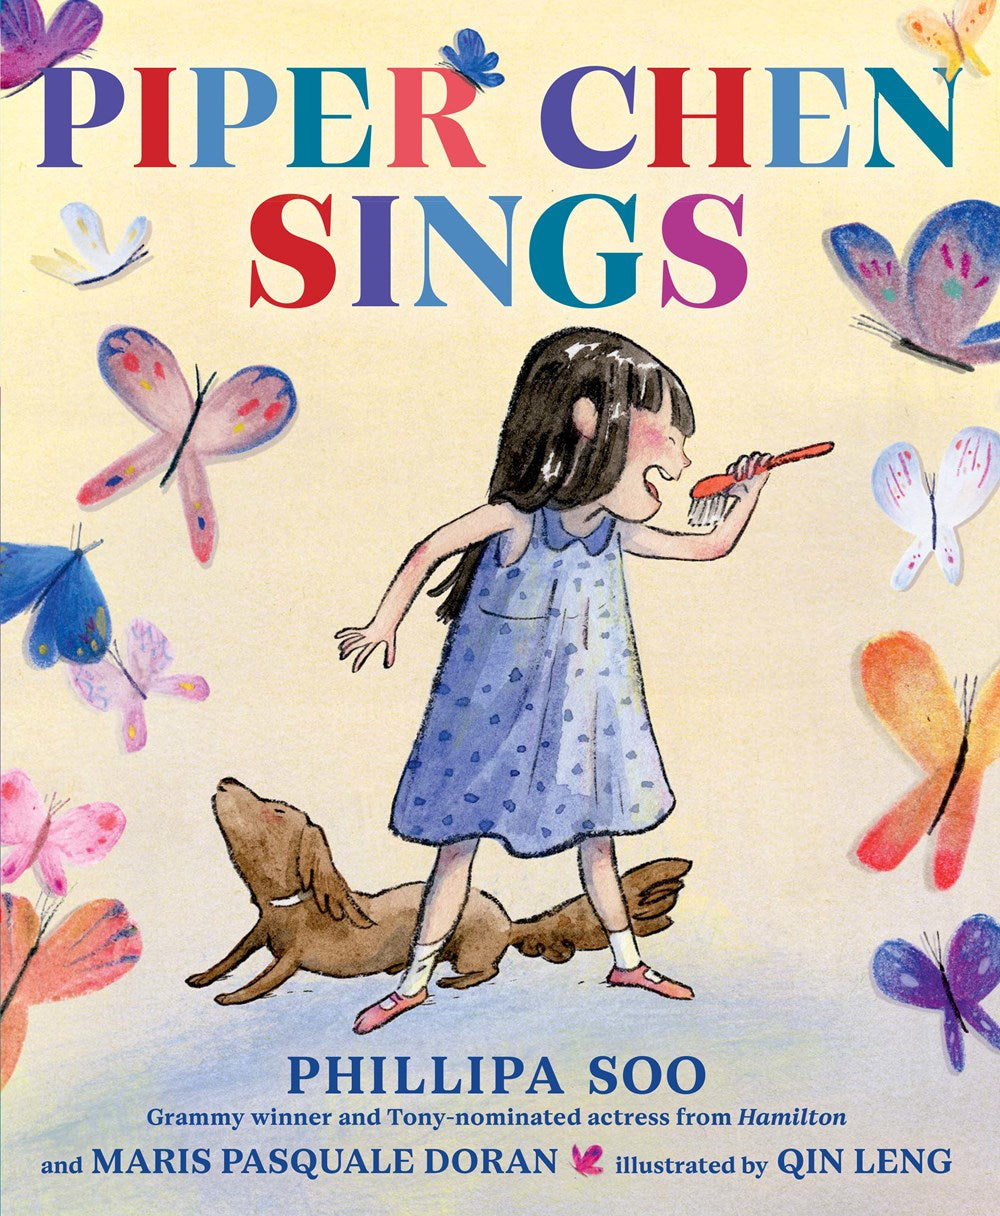 Piper Chen Sings by Phillipa Soo & Maris Pasquale Doran, Illustrated by Qin Leng (4/2/24)